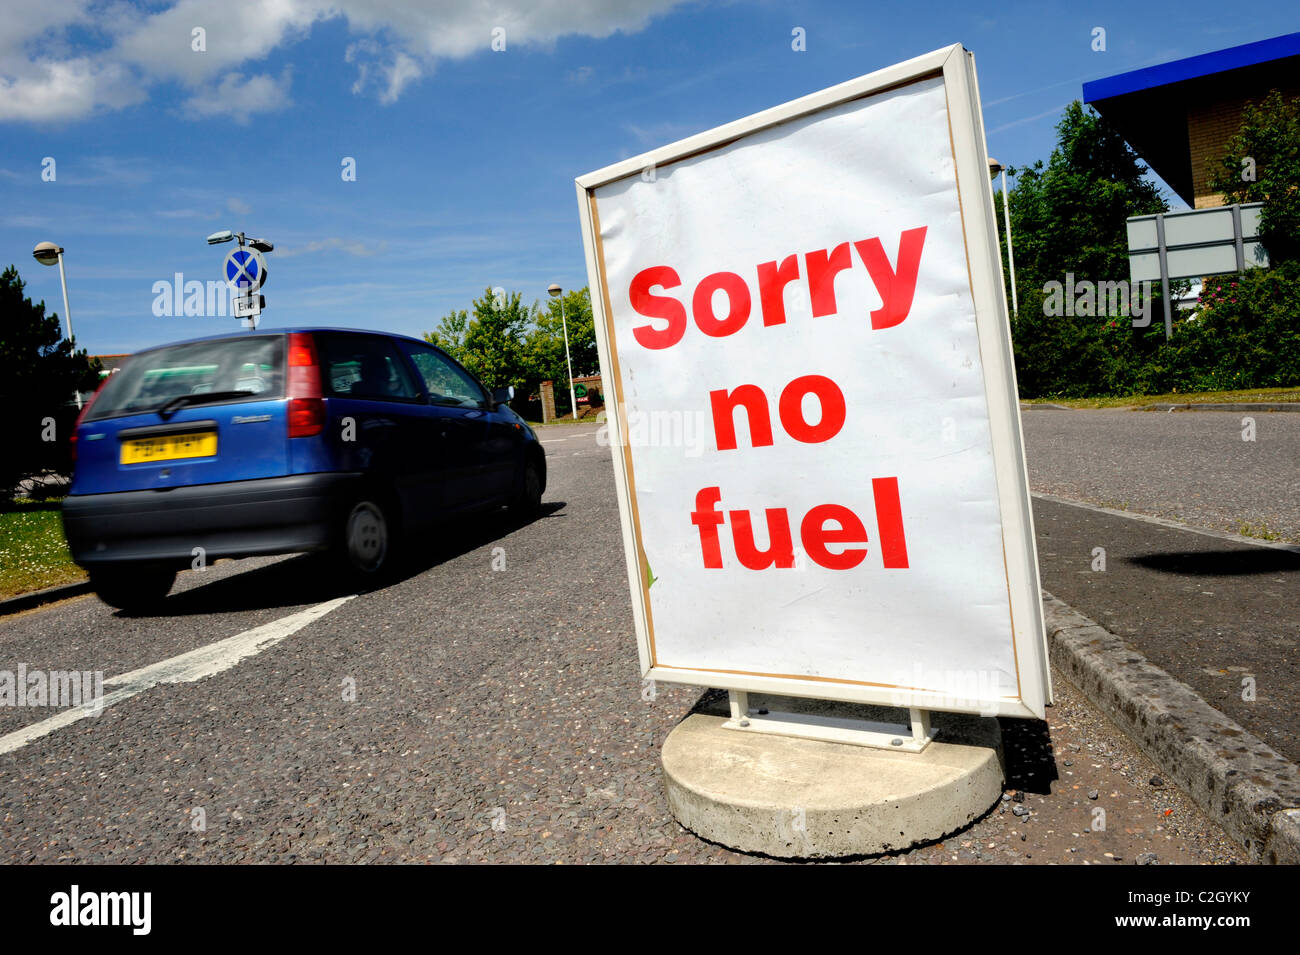 A petrol station with a sign saying sorry no fuel during National strike by hauliers, UK Stock Photo